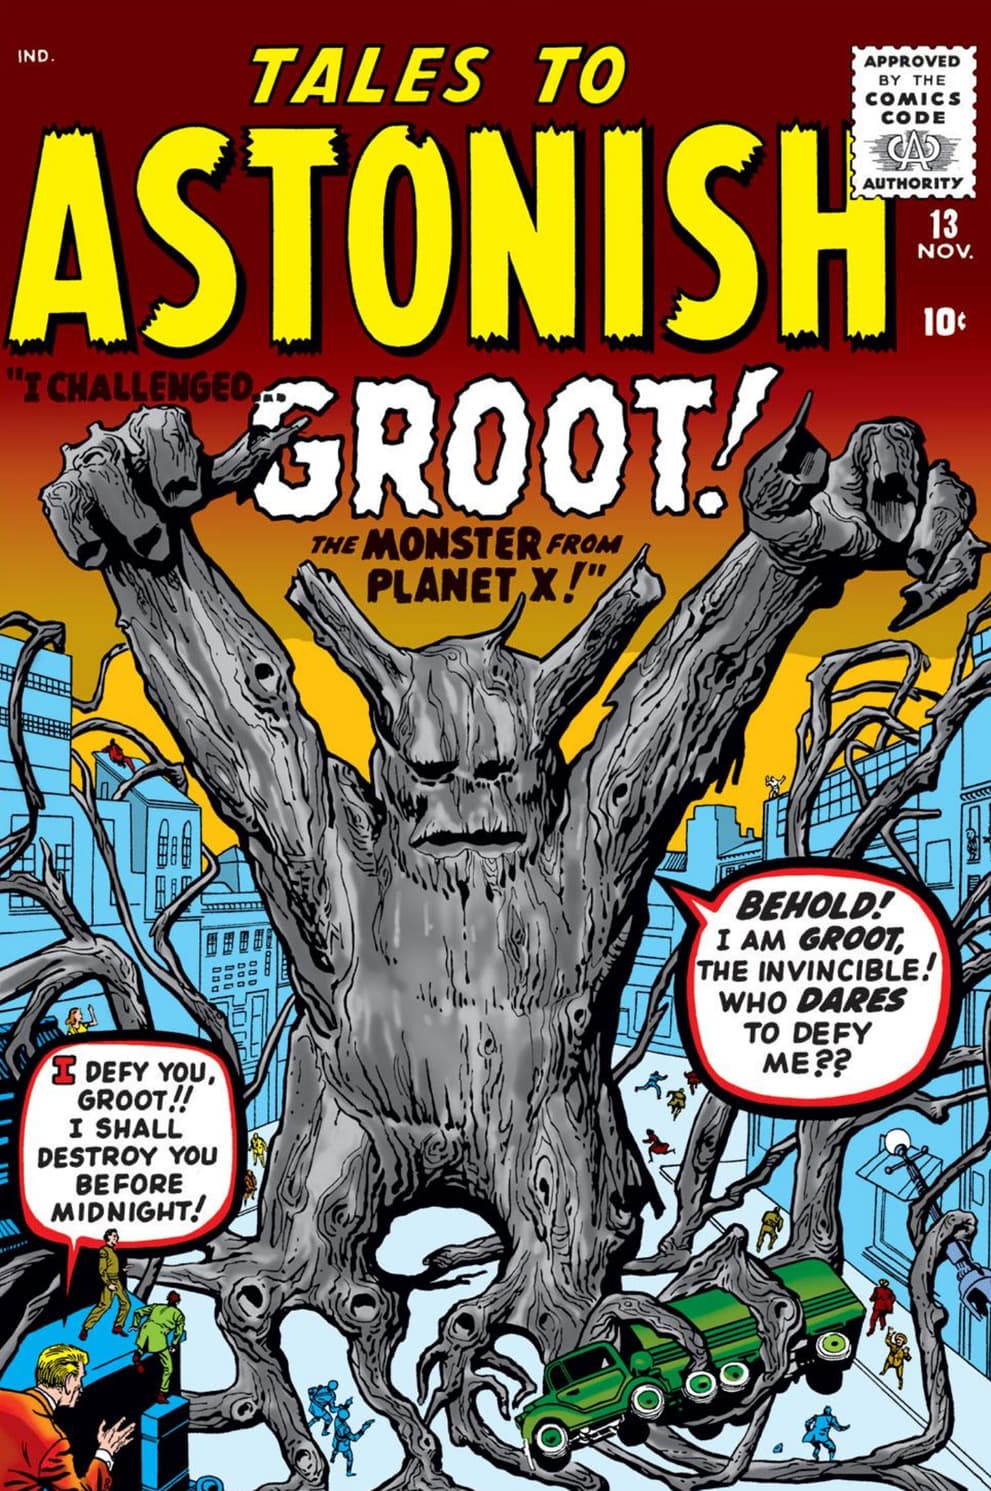 TALES TO ASTONISH (1959) #13 cover by Jack Kirby, Steve Ditko, and Stan Goldberg